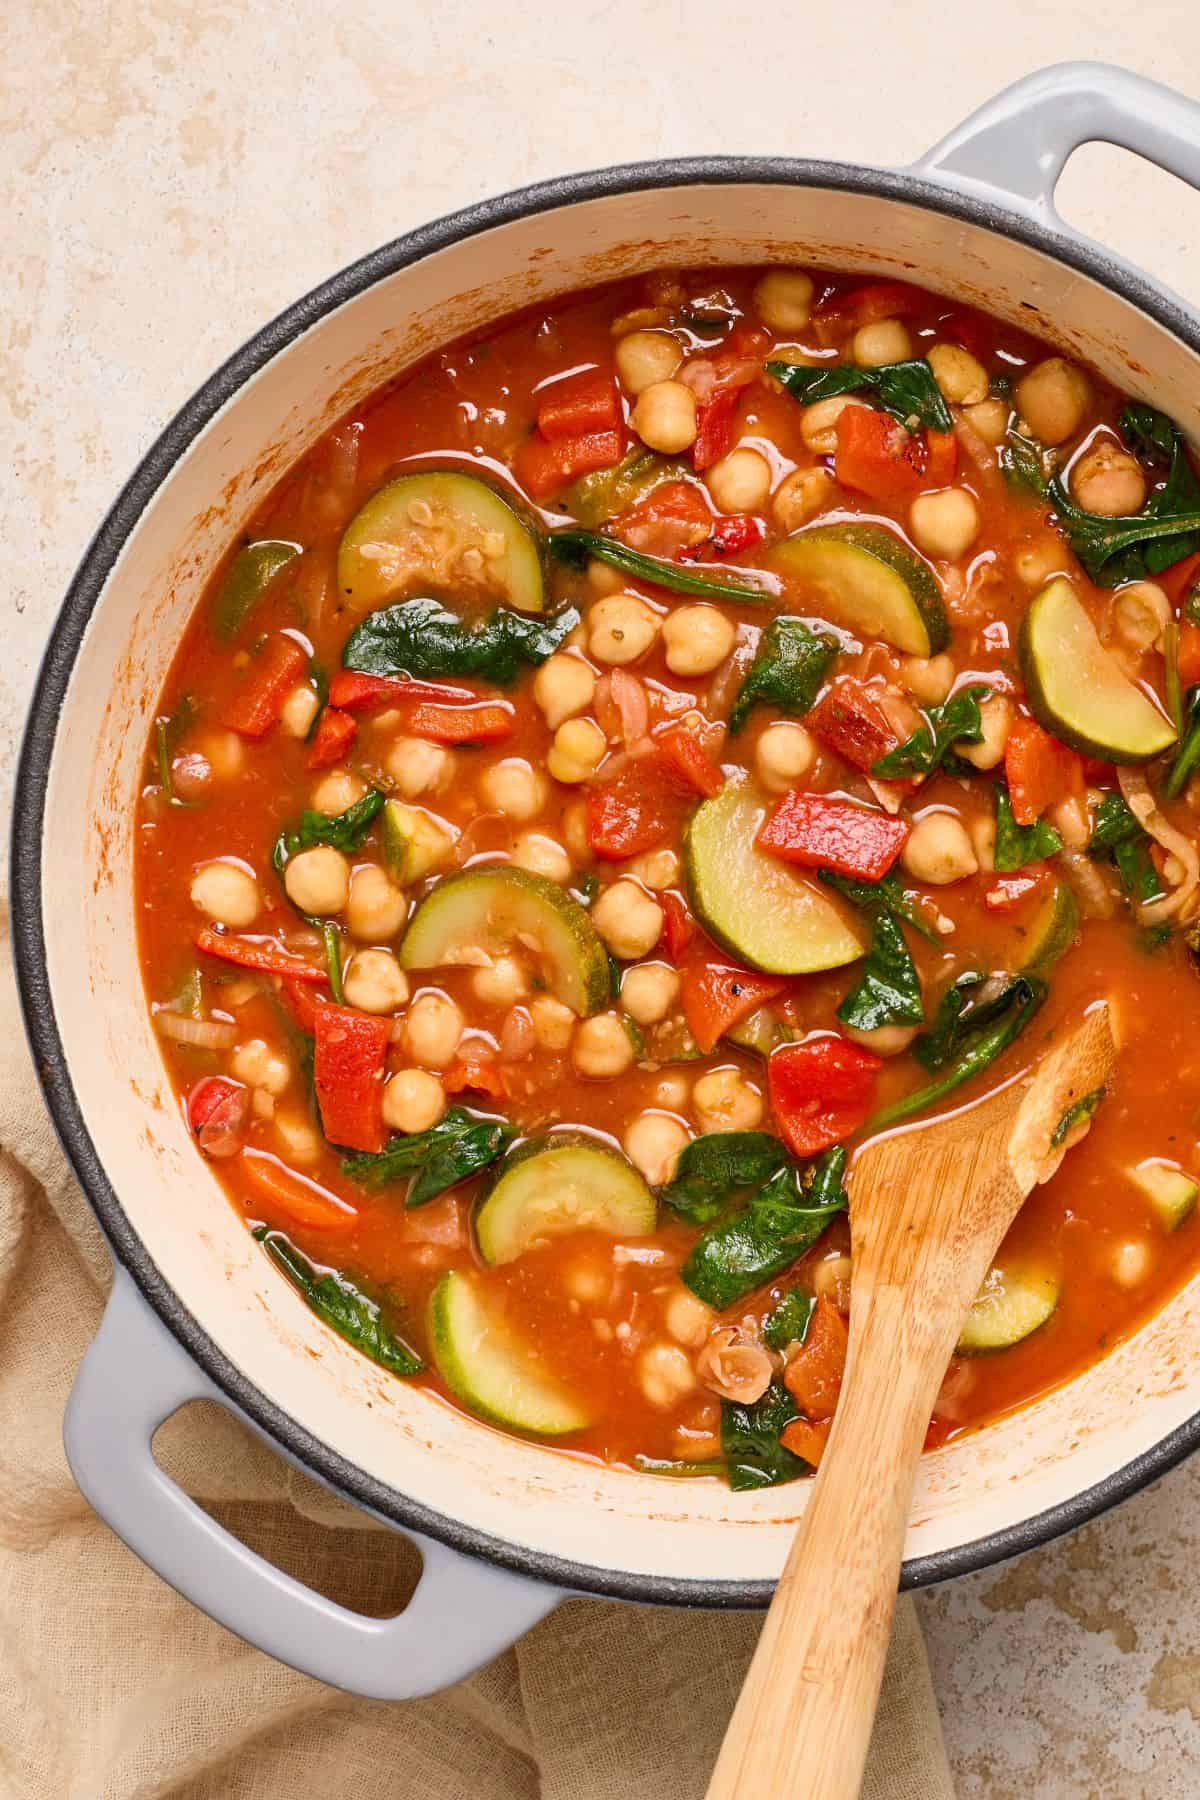 Large saucepan with Chickpea and Zucchini Stew, with a wooden spoon resting in it.